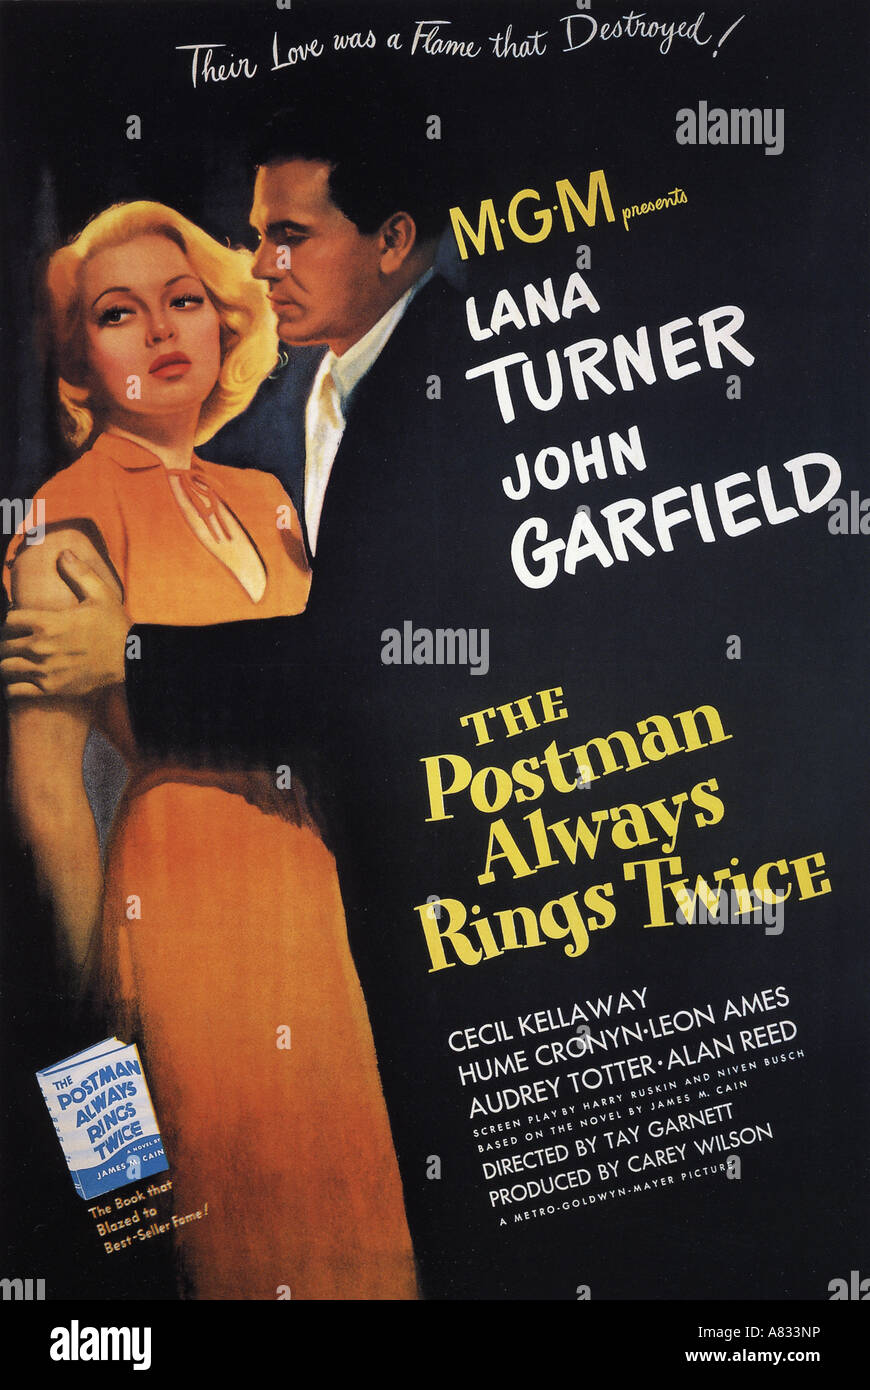 THE POSTMAN ALWAYS RINGS TWICE - poster for 1946 MGM film with Lana Turner and John Garfield Stock Photo